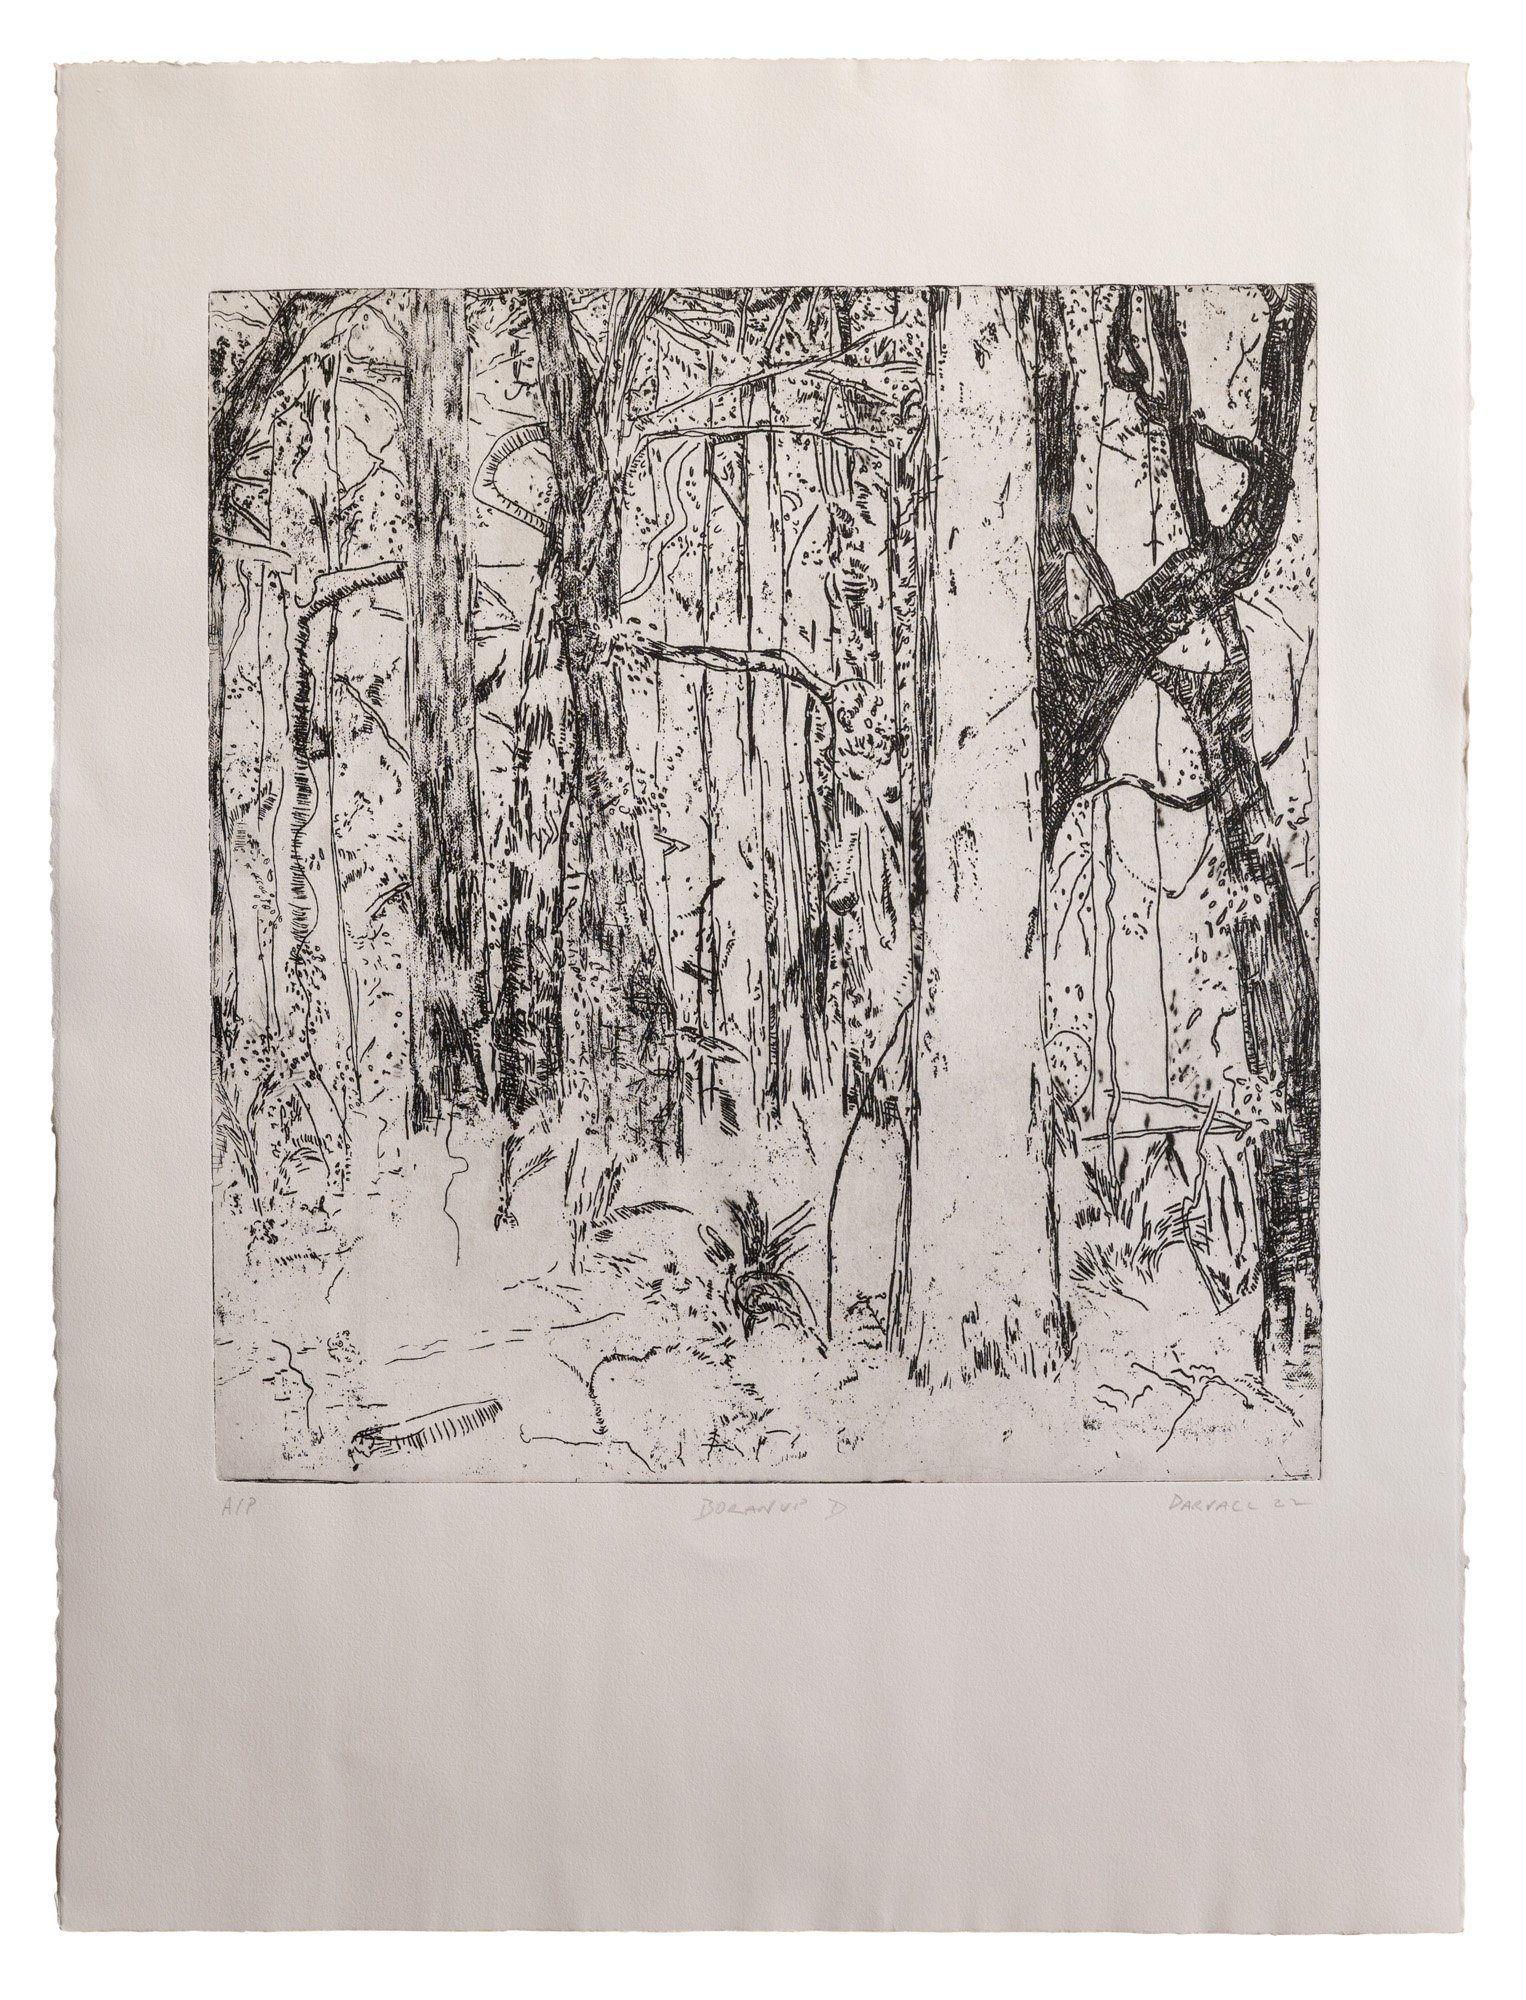  Boranup D, 2022, (No 4)  56 x 76 cm etching on  Hahneumle-image size 45x50cm artist proof   edition of 20 